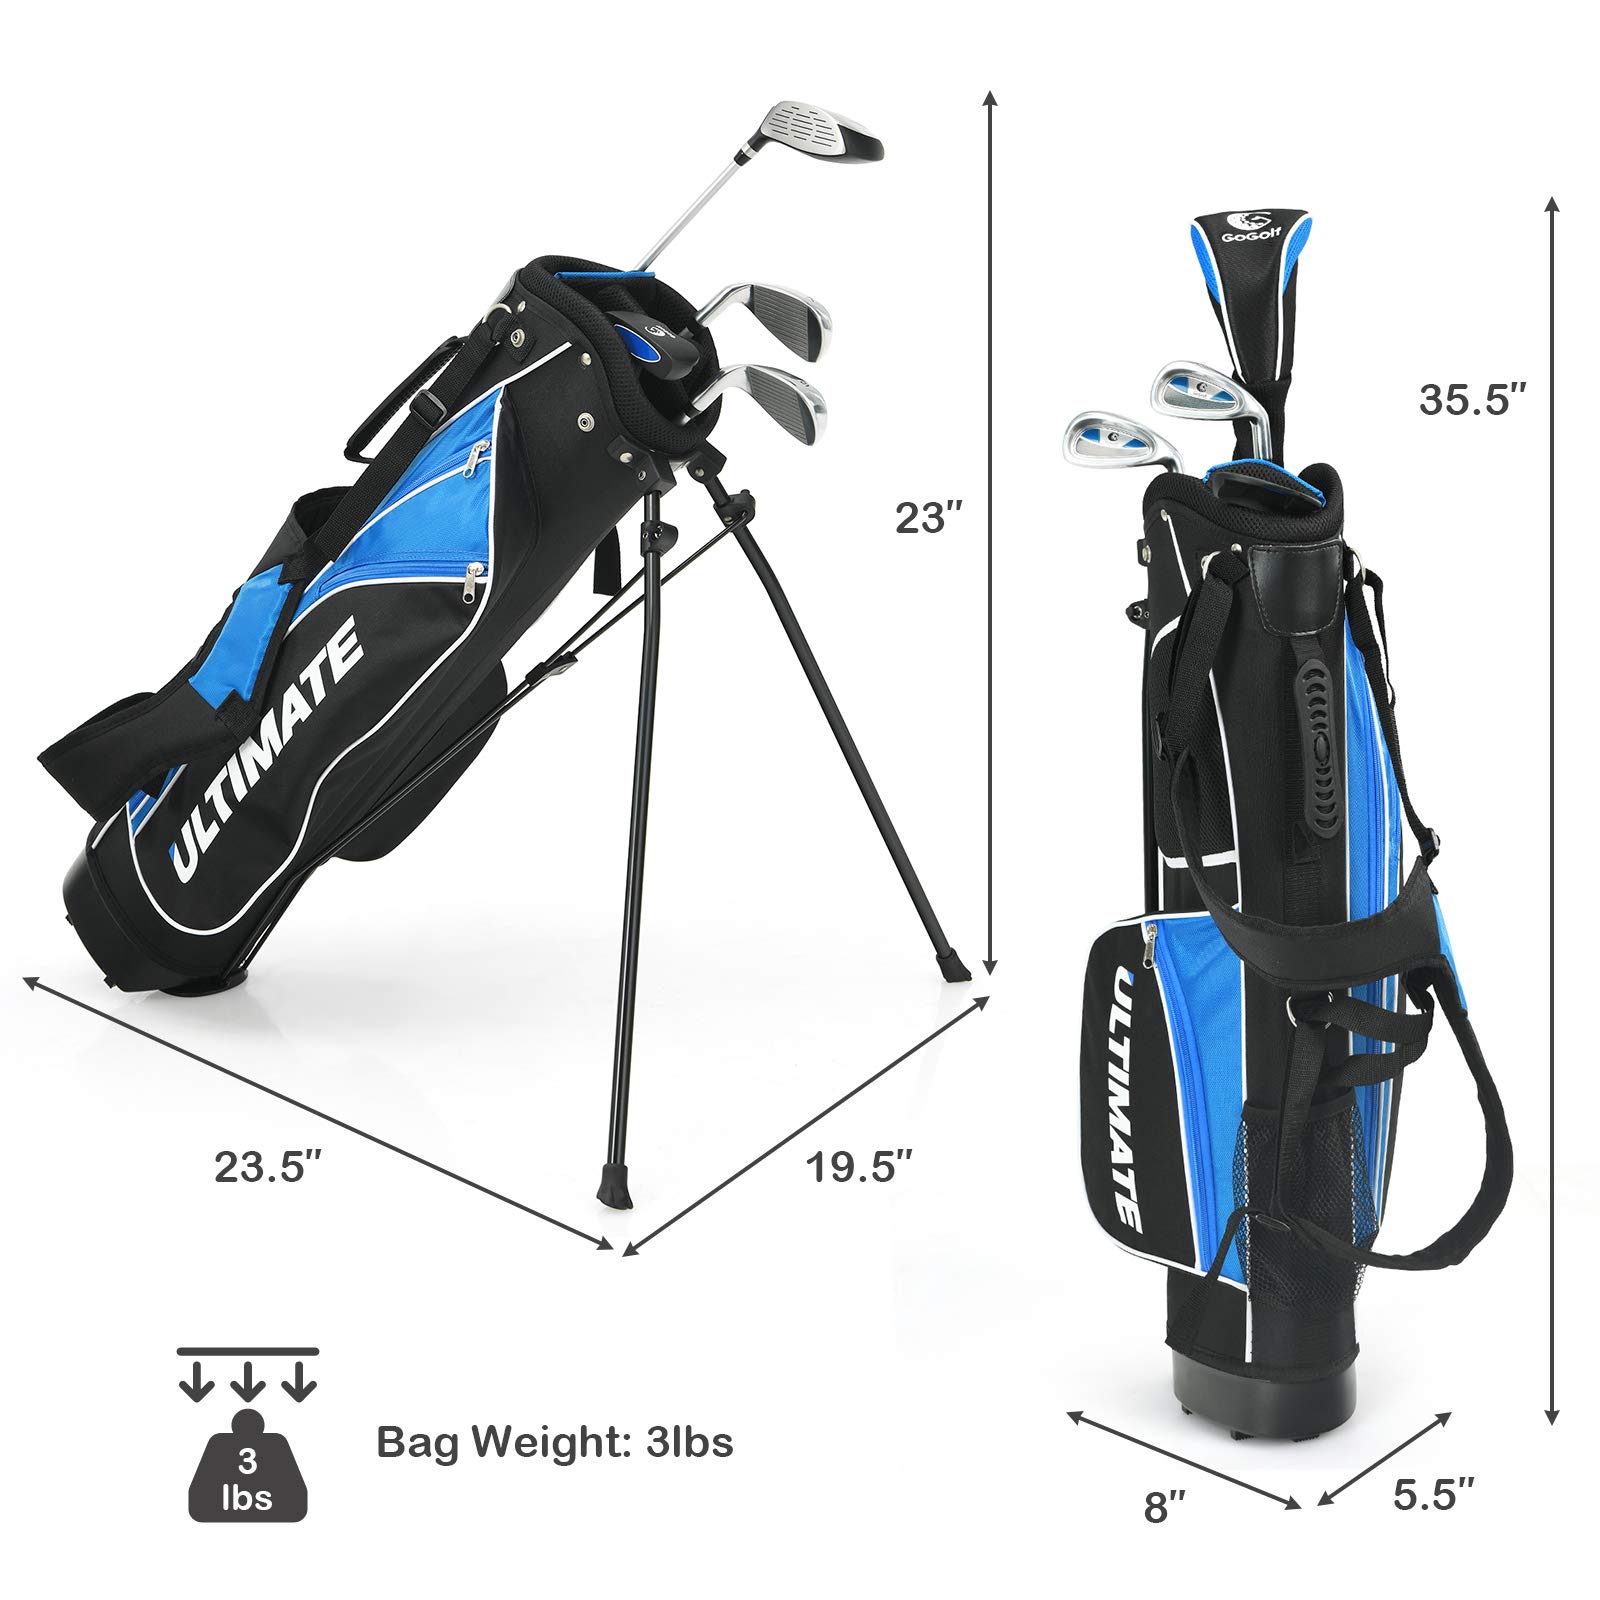 Tangkula Junior Complete Golf Club Set for Children Right Hand, Includes 3# Fairway Wood, 7# & 9# Irons, Putter, Head Cover & Rain Hood, Golf Stand Bag, Perfect for Children, Kids